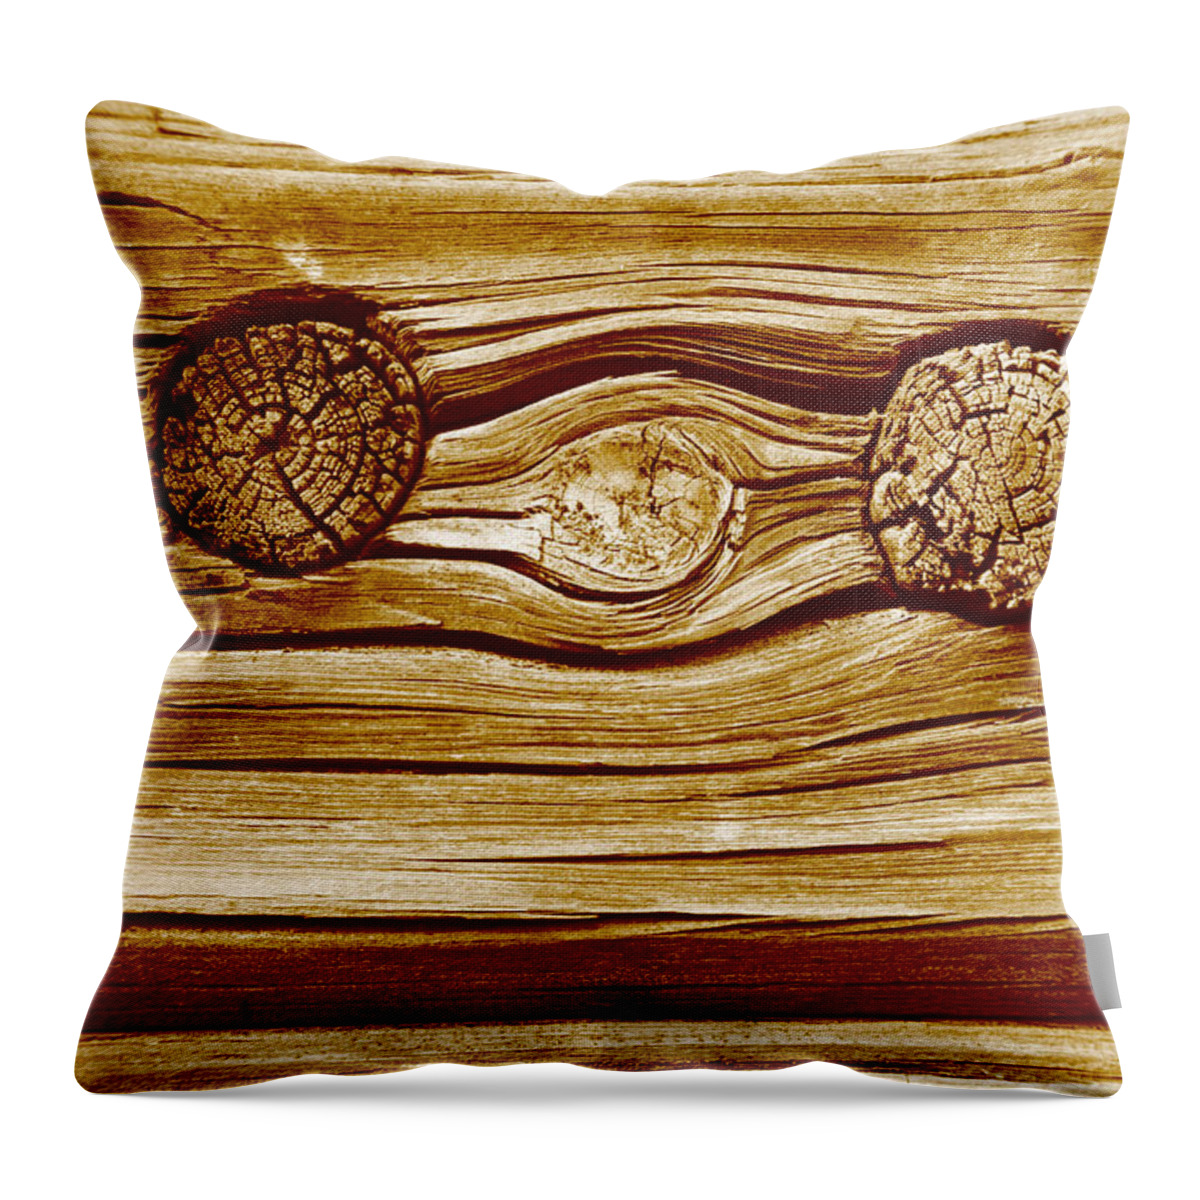 Knothole Throw Pillow featuring the photograph A pair of knotholes by Ulrich Kunst And Bettina Scheidulin